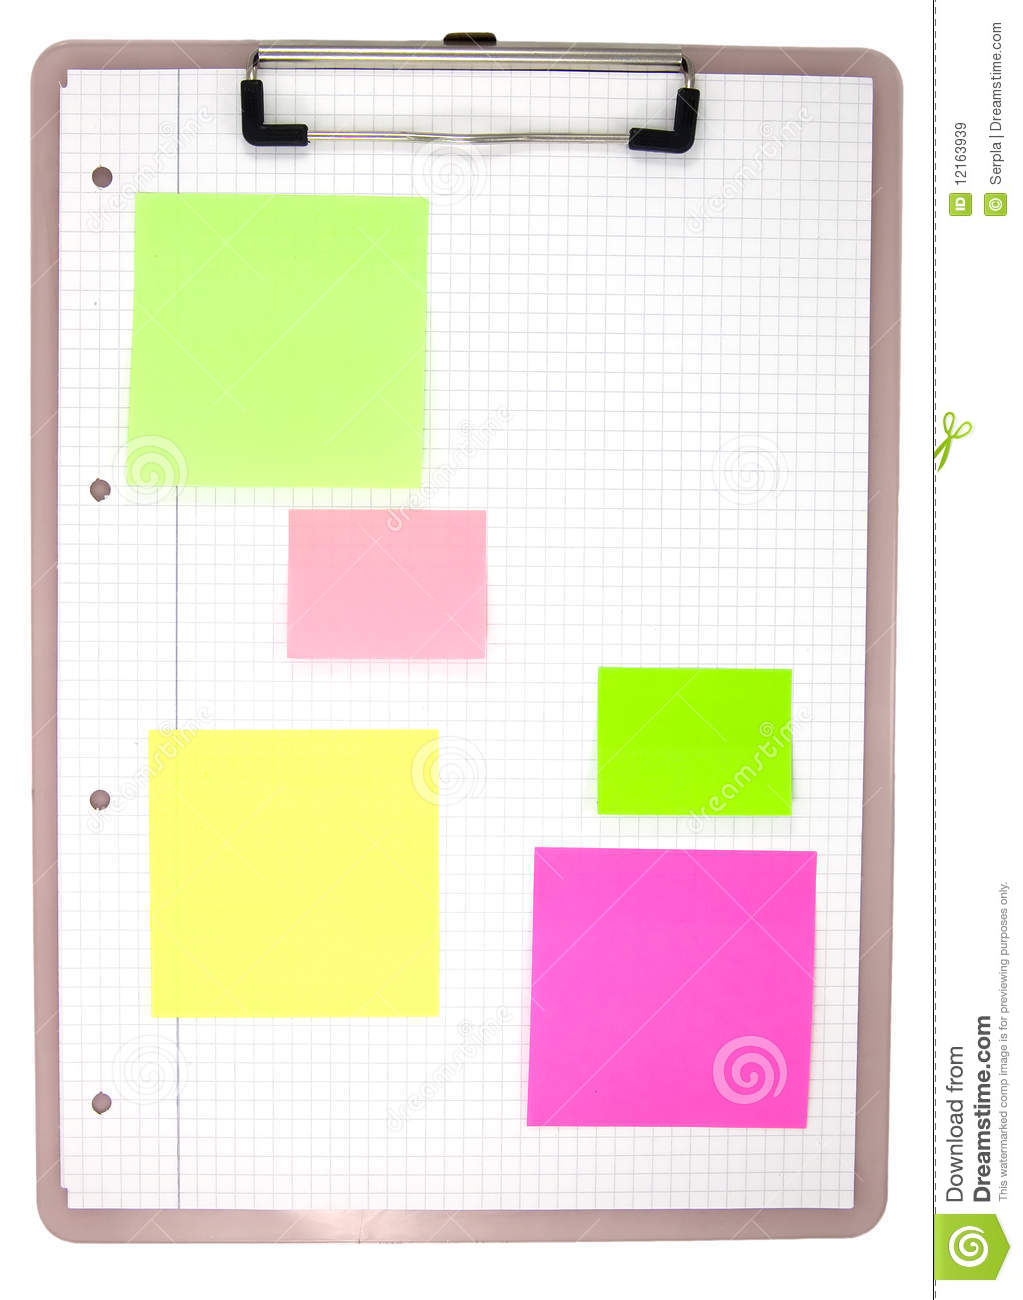 Open Binder With Post It Notes Royalty Free Stock Images   Image